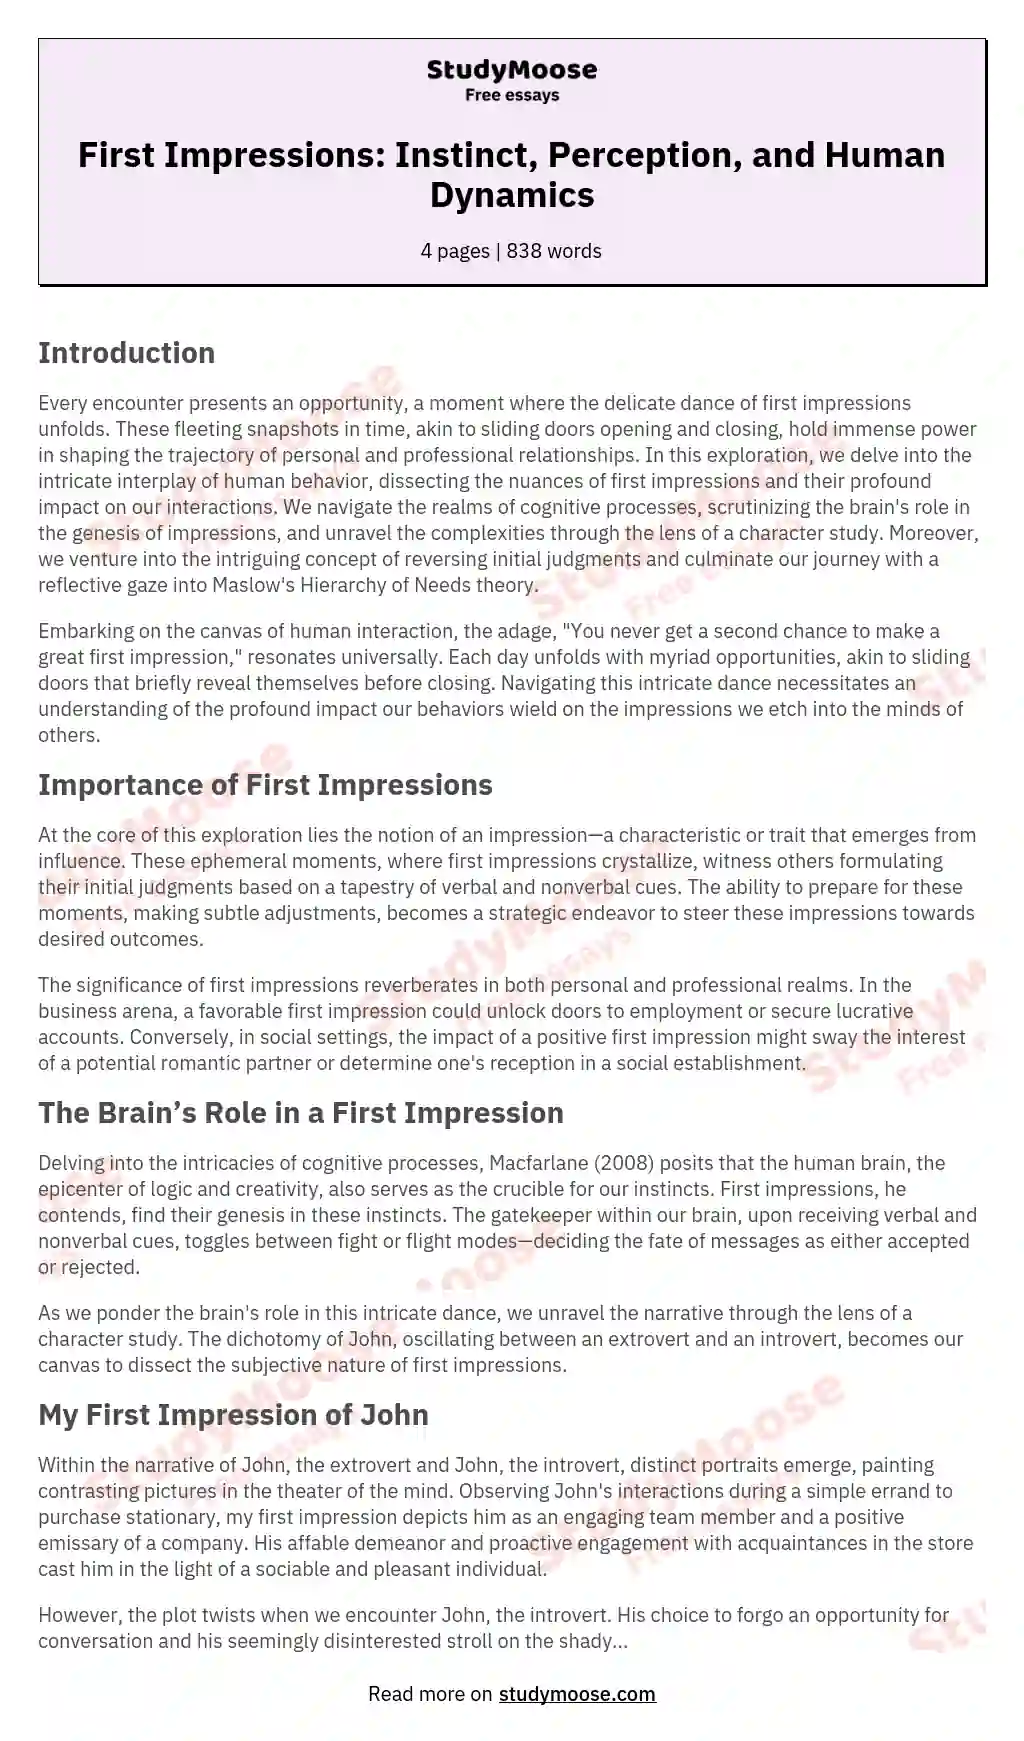 Impact of a First Impression